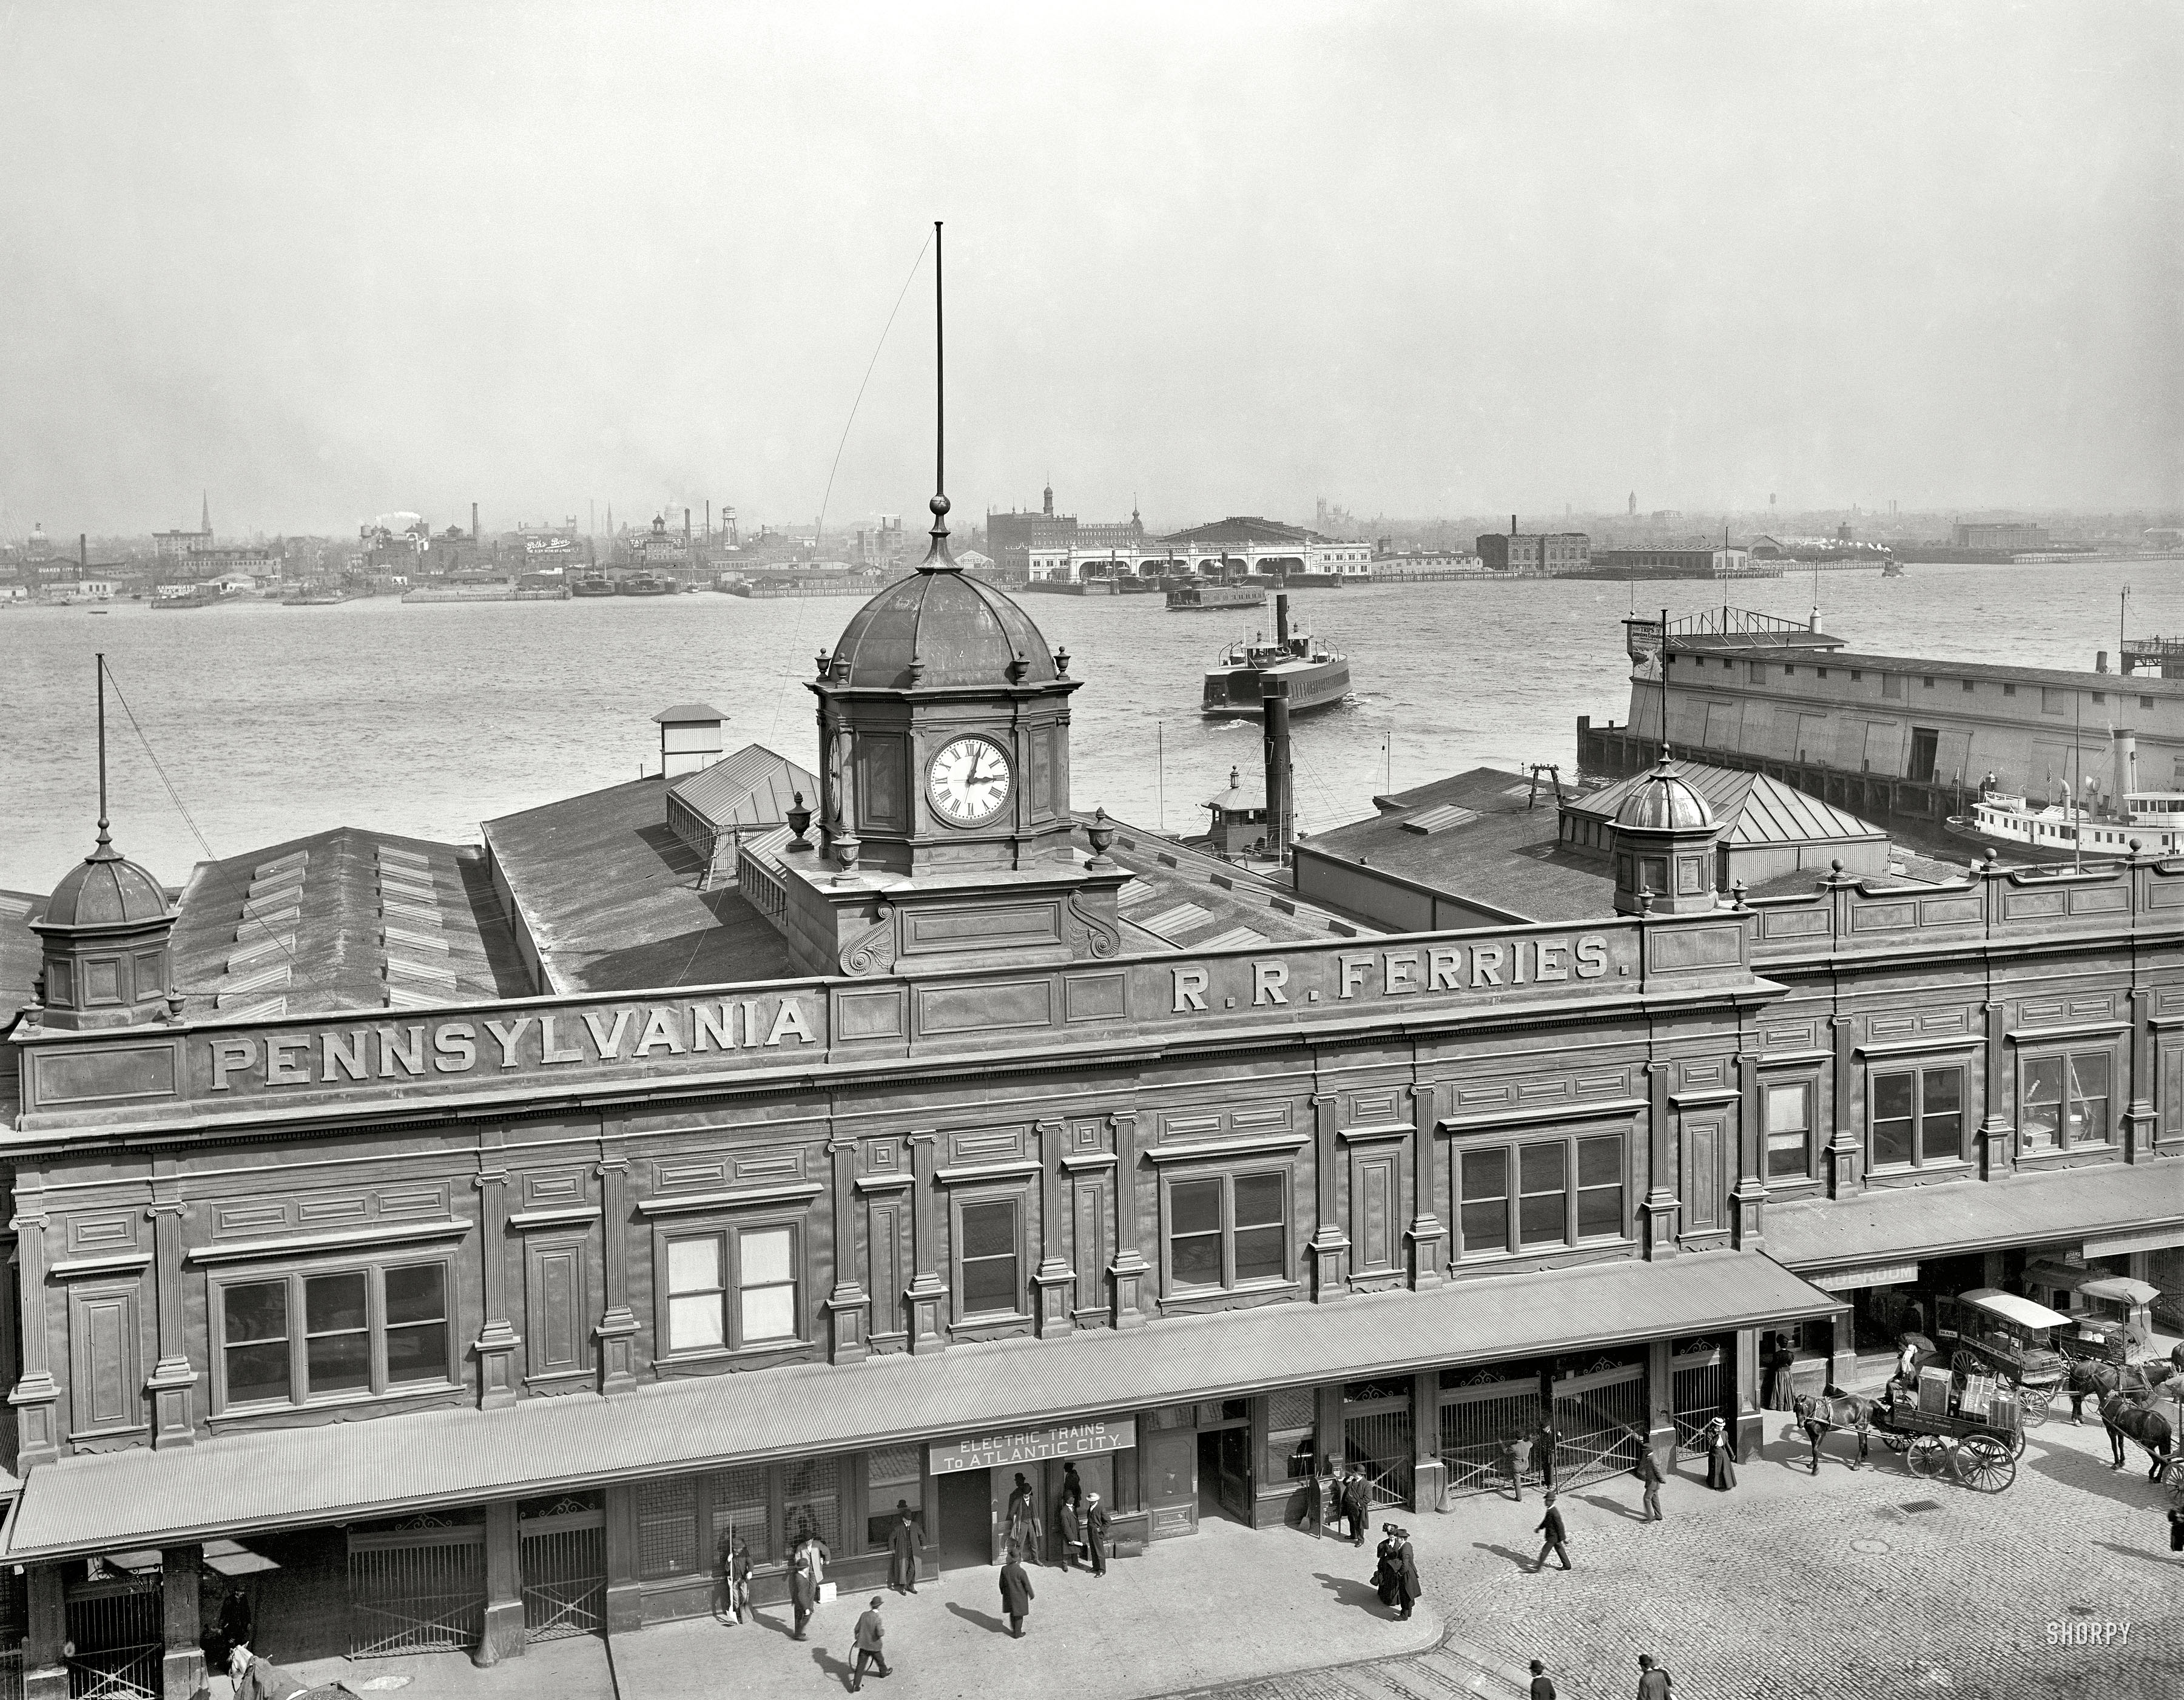 Philadelphia circa 1908. "Pennsylvania R.R. ferry terminal, Market Street." Across the Delaware River we can see the Campbell's Soup factory in Camden. 8x10 inch dry plate glass negative, Detroit Publishing Company. View full size.